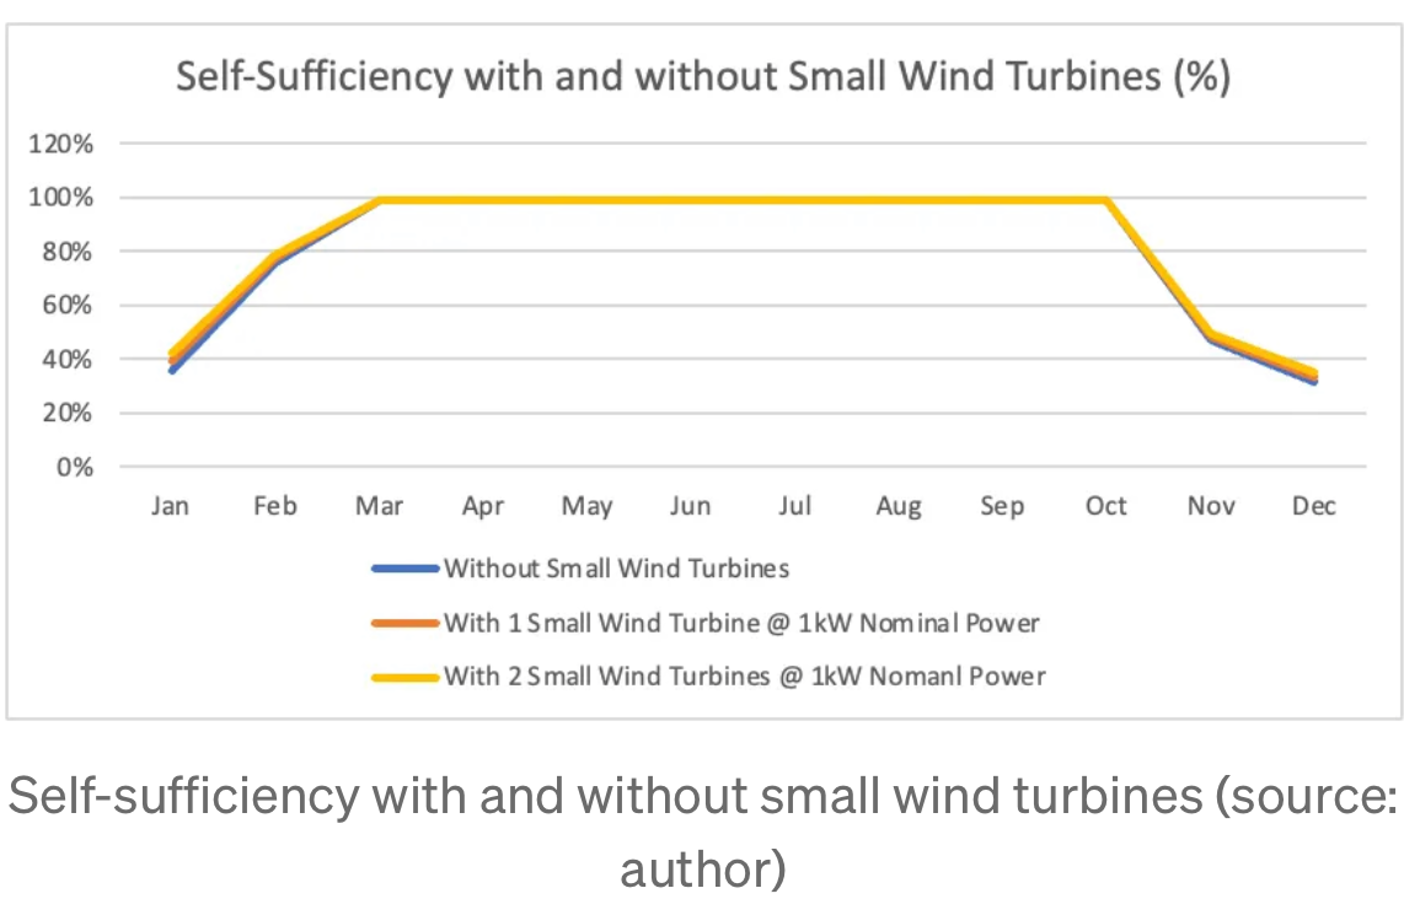 graph on self-sufficiency with and without wind turbines